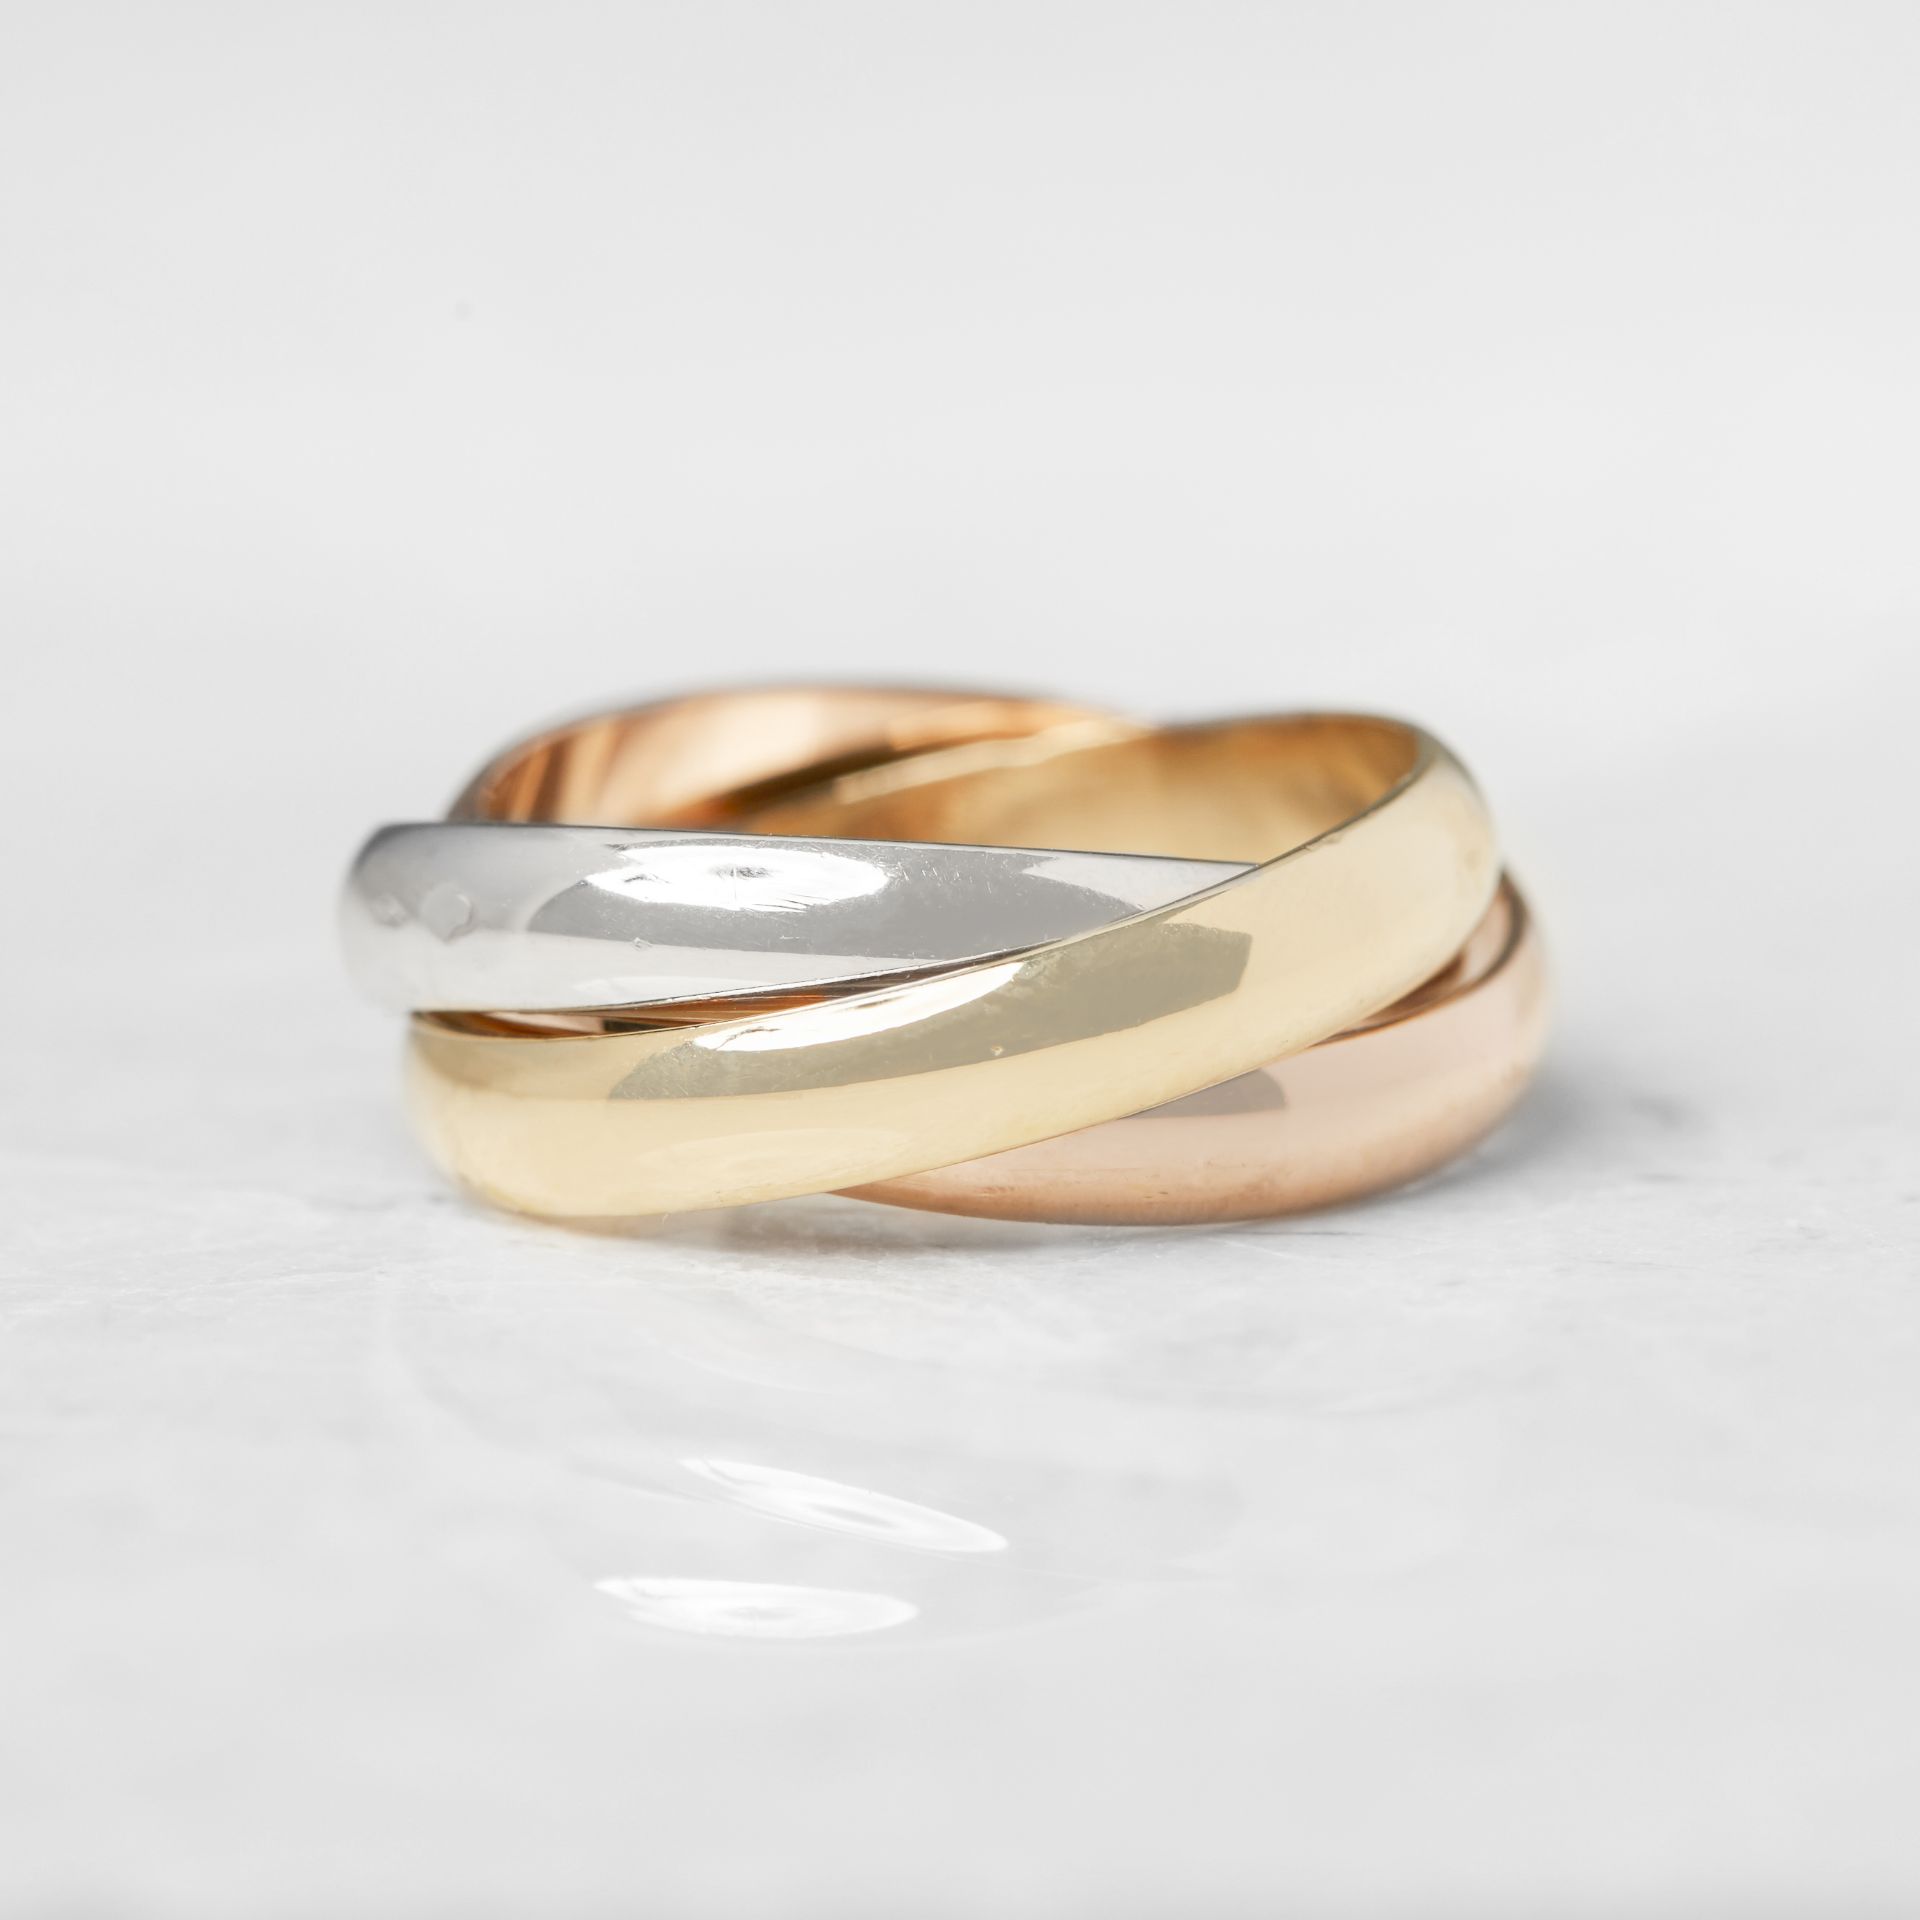 Cartier 18k Yellow, White & Rose Gold Trinity Ring - Image 9 of 18